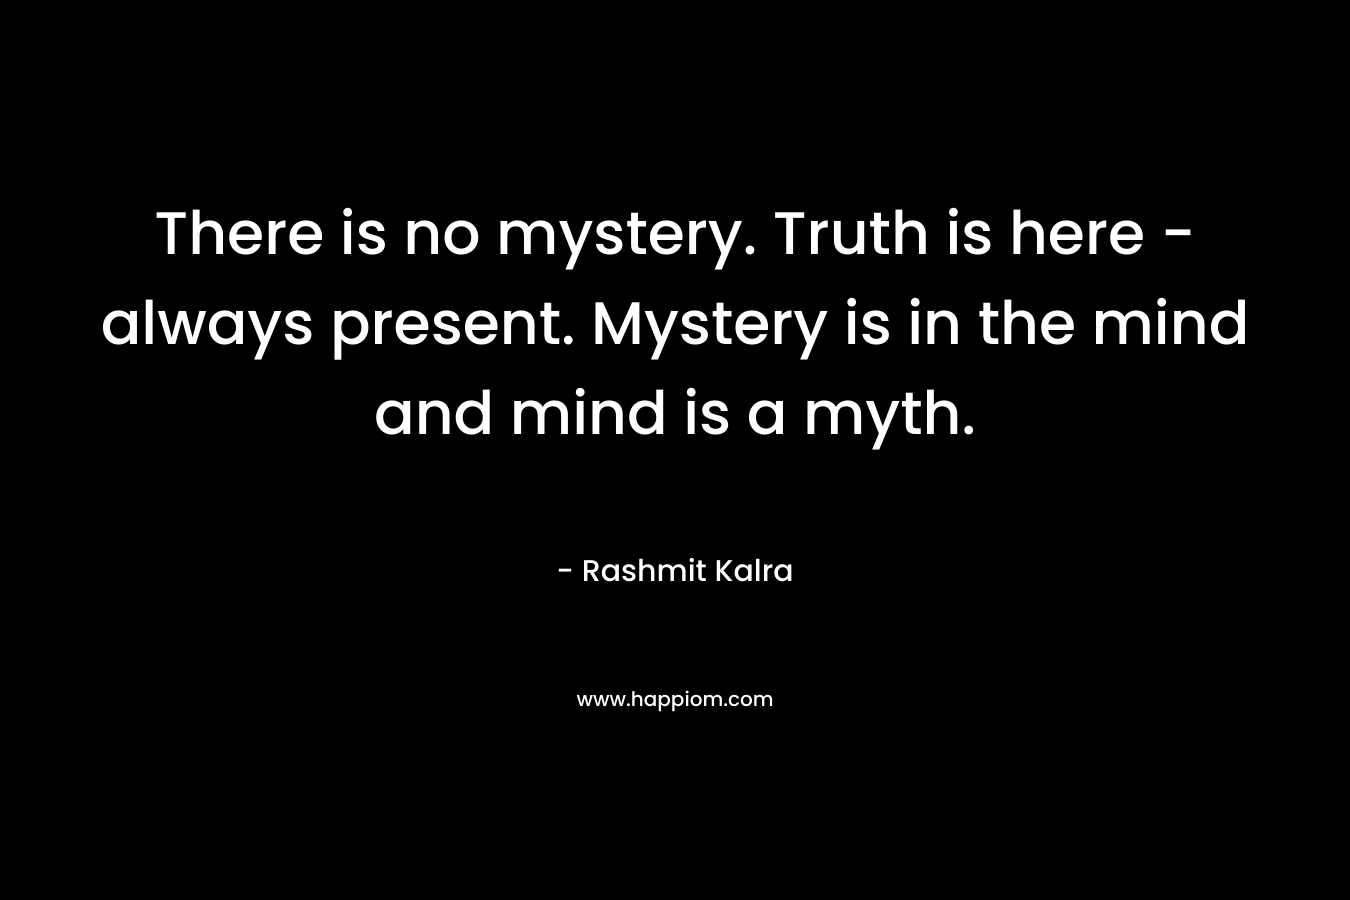 There is no mystery. Truth is here - always present. Mystery is in the mind and mind is a myth.